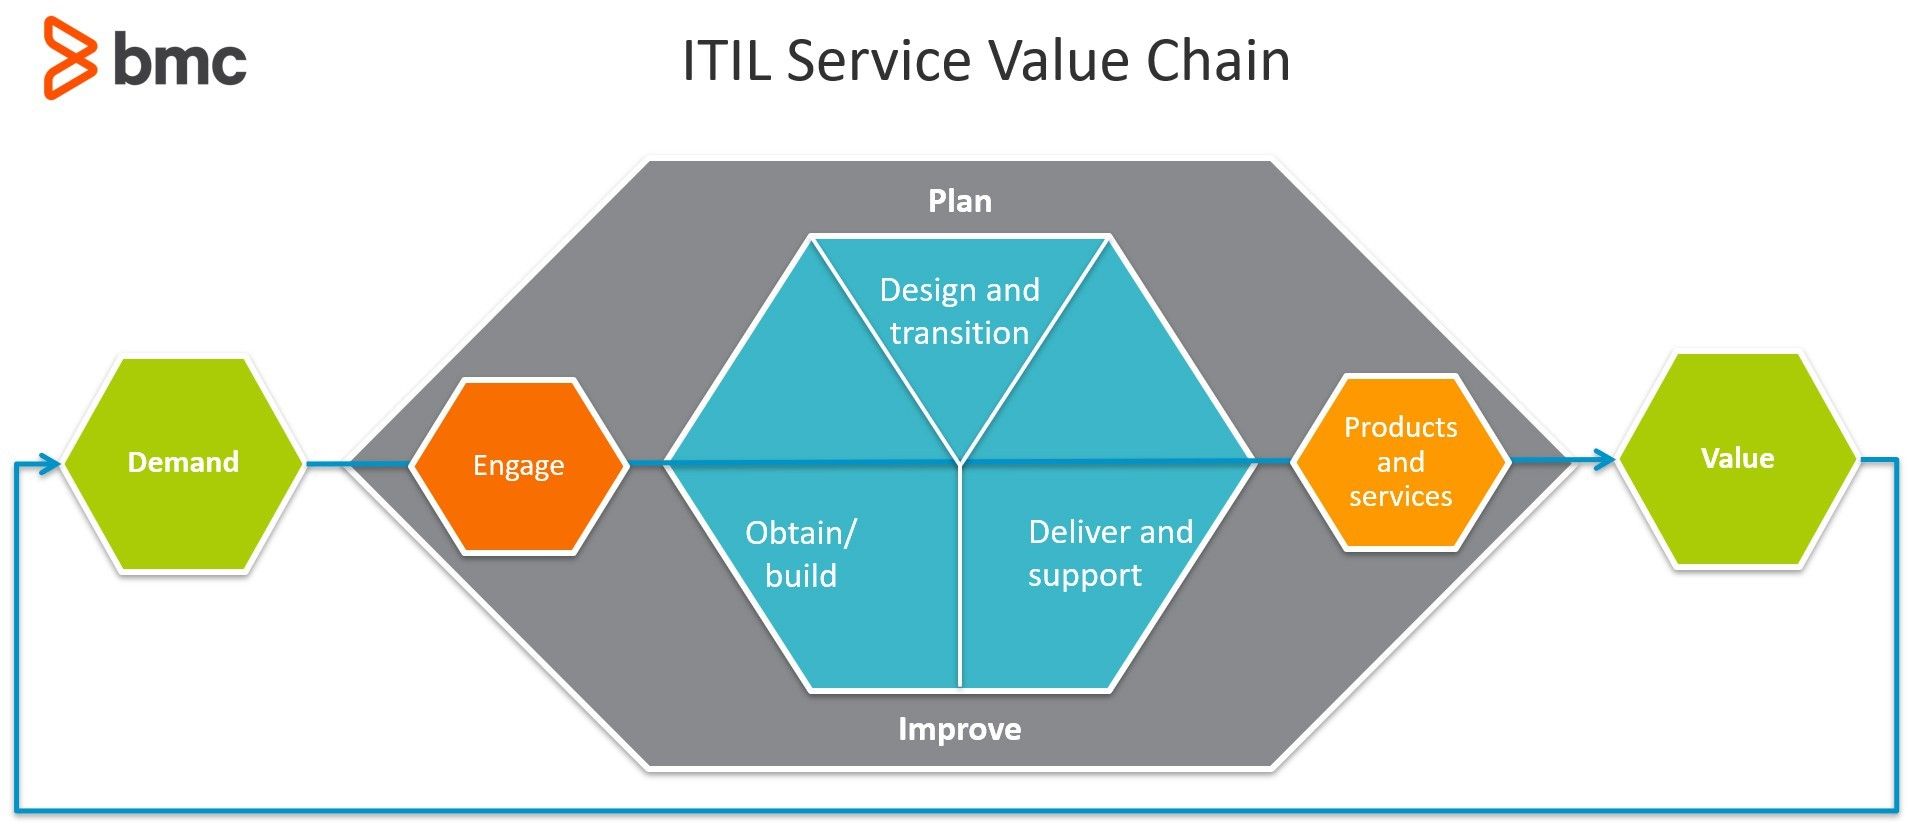 ITIL Service Value Chain